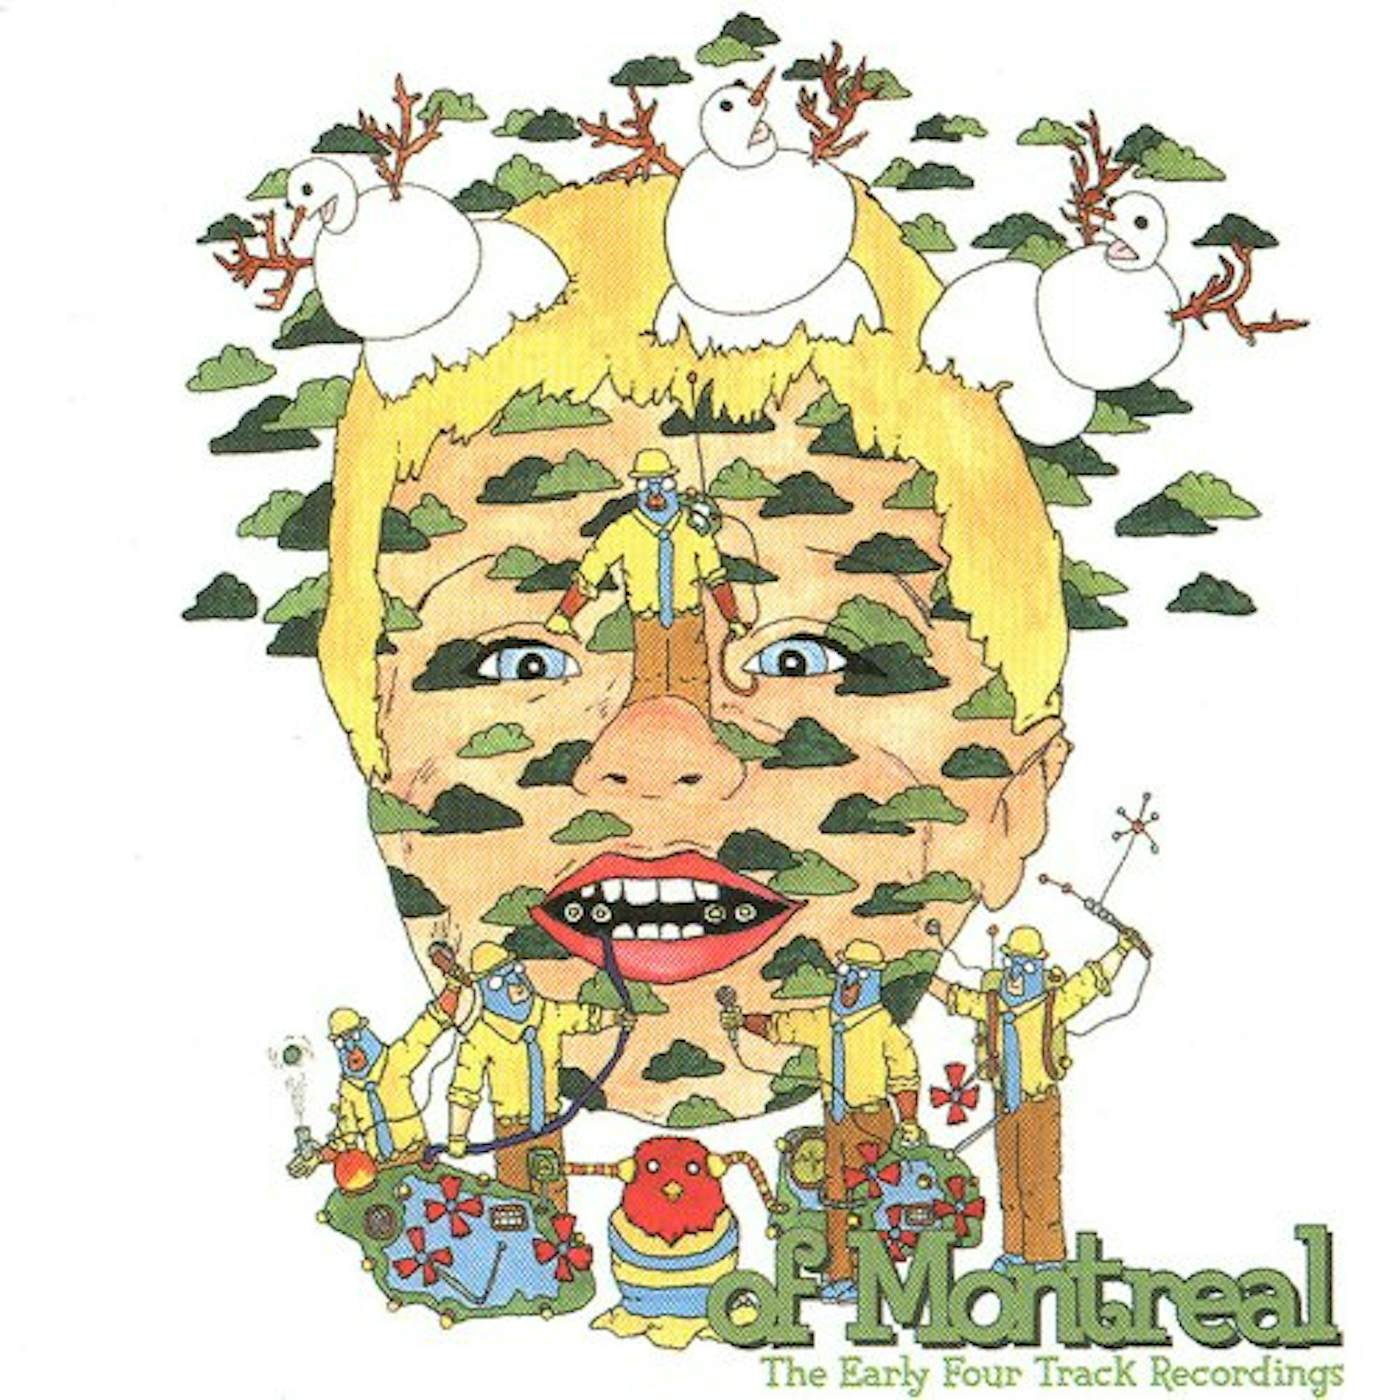 of Montreal EARLY FOUR TRACK RECORDINGS Vinyl Record